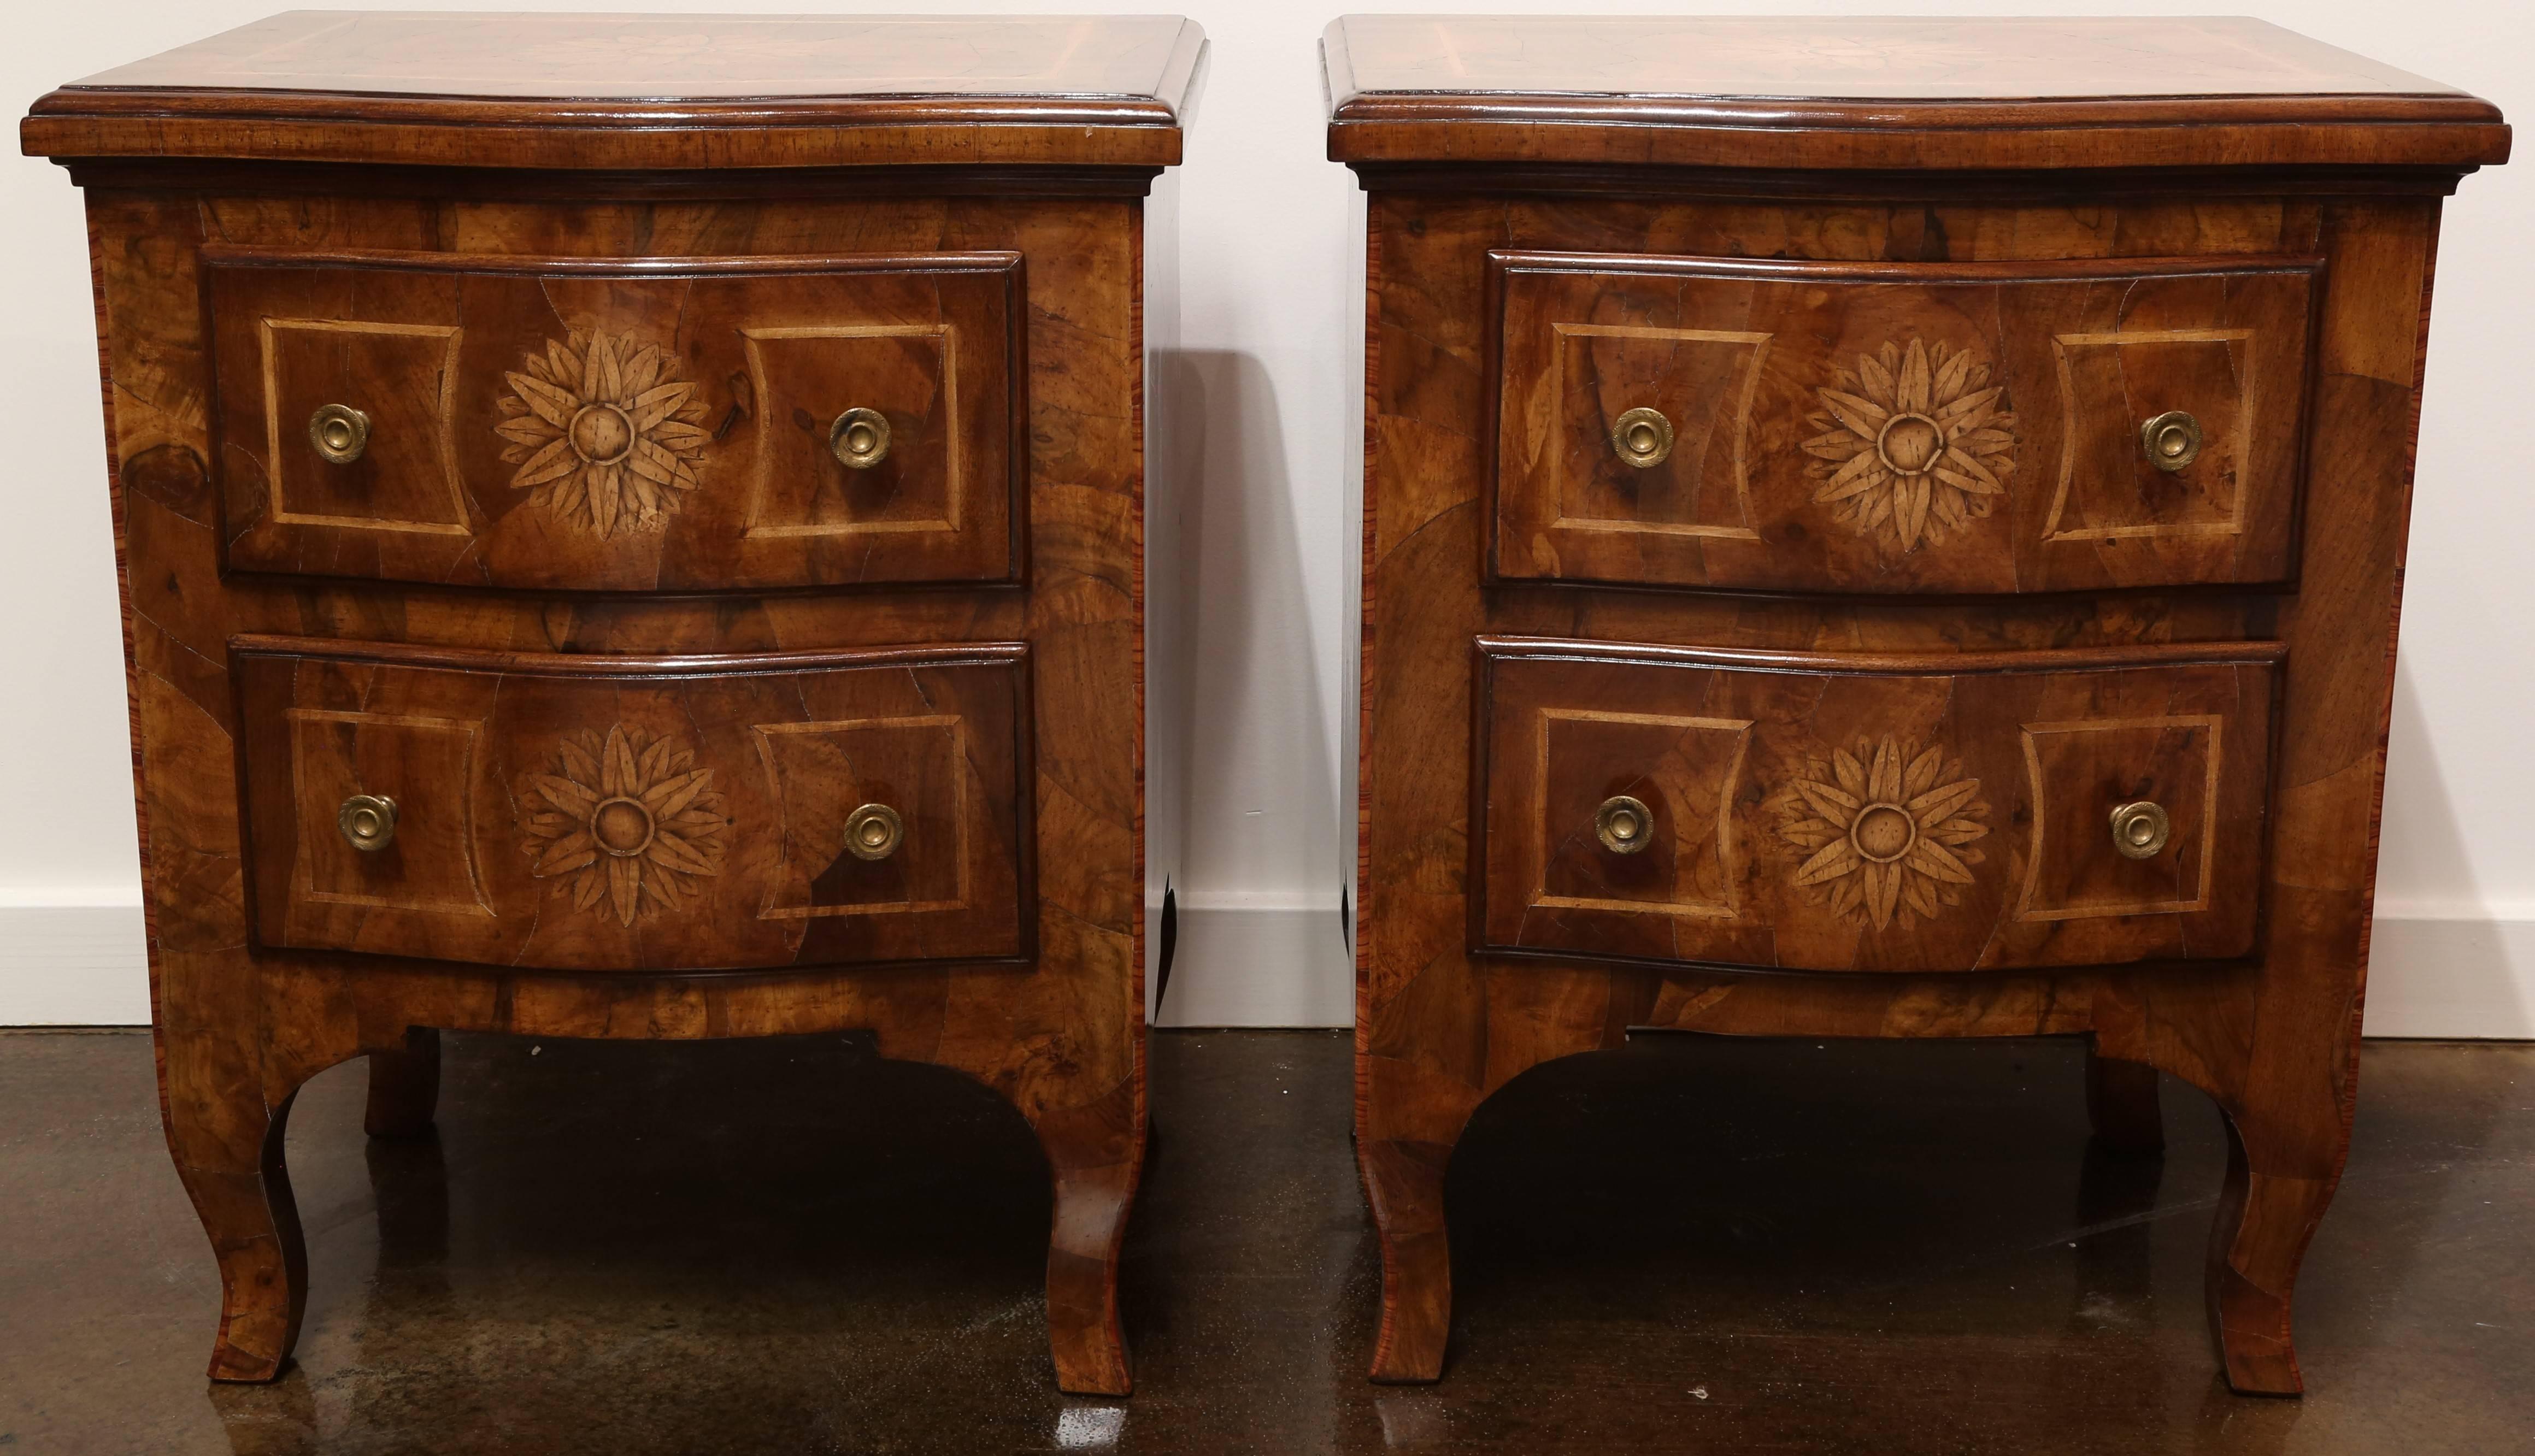 Pair of Italian walnut shaped chest of drawers featuring two drawers, walnut oyster wood styling and hand-carved inlays of Maple and Rosewood, with a hand rubbed old world finish, Italy.